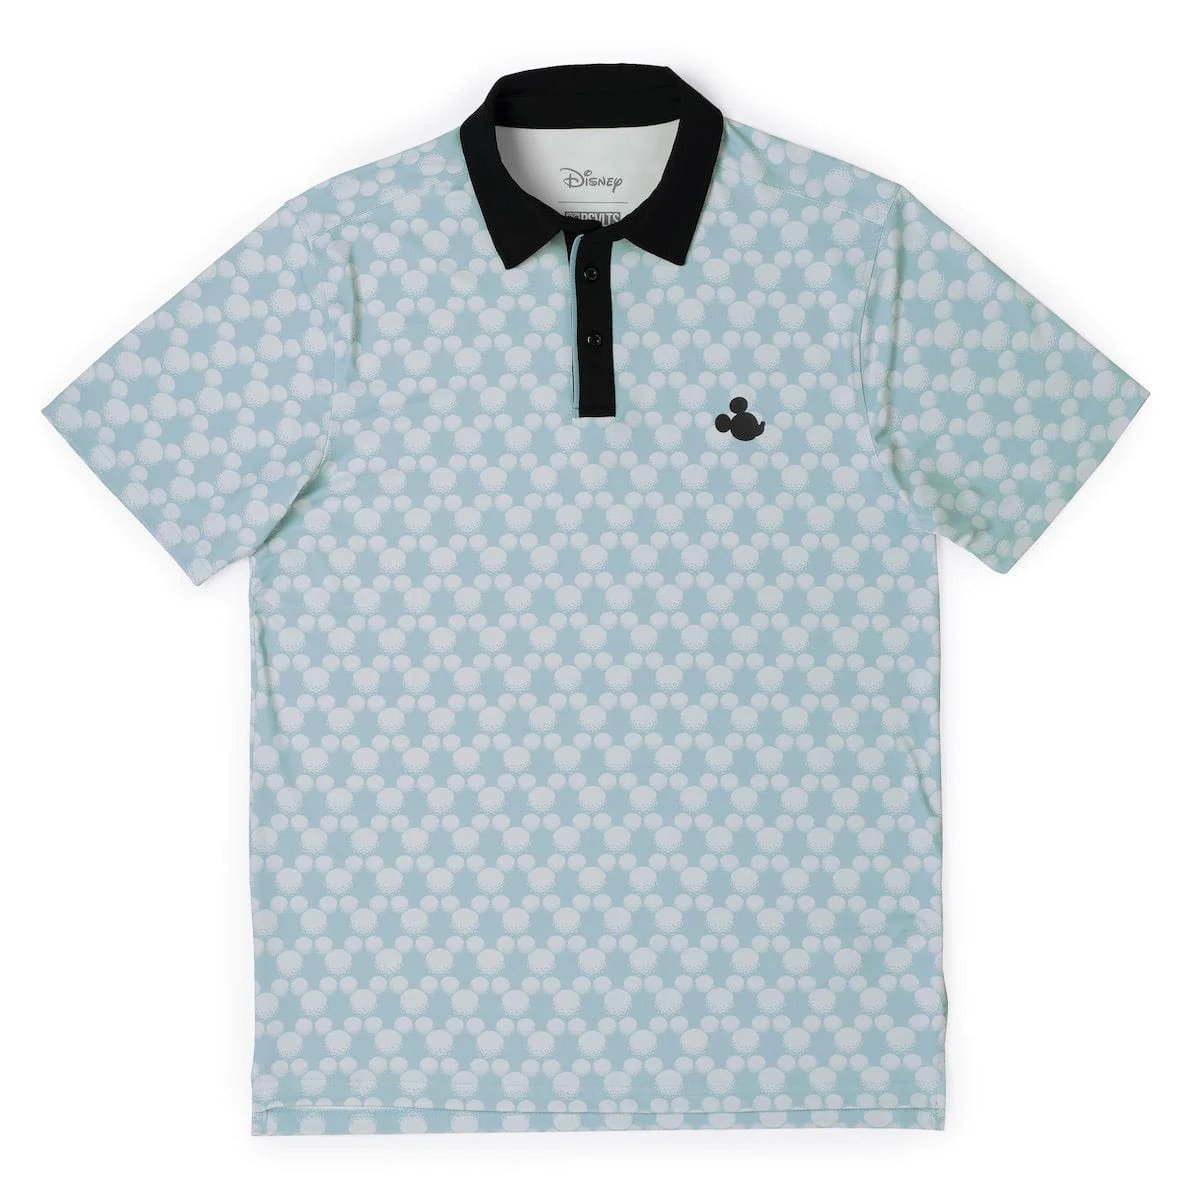 "Mickey's Country Club" All-Day Polo